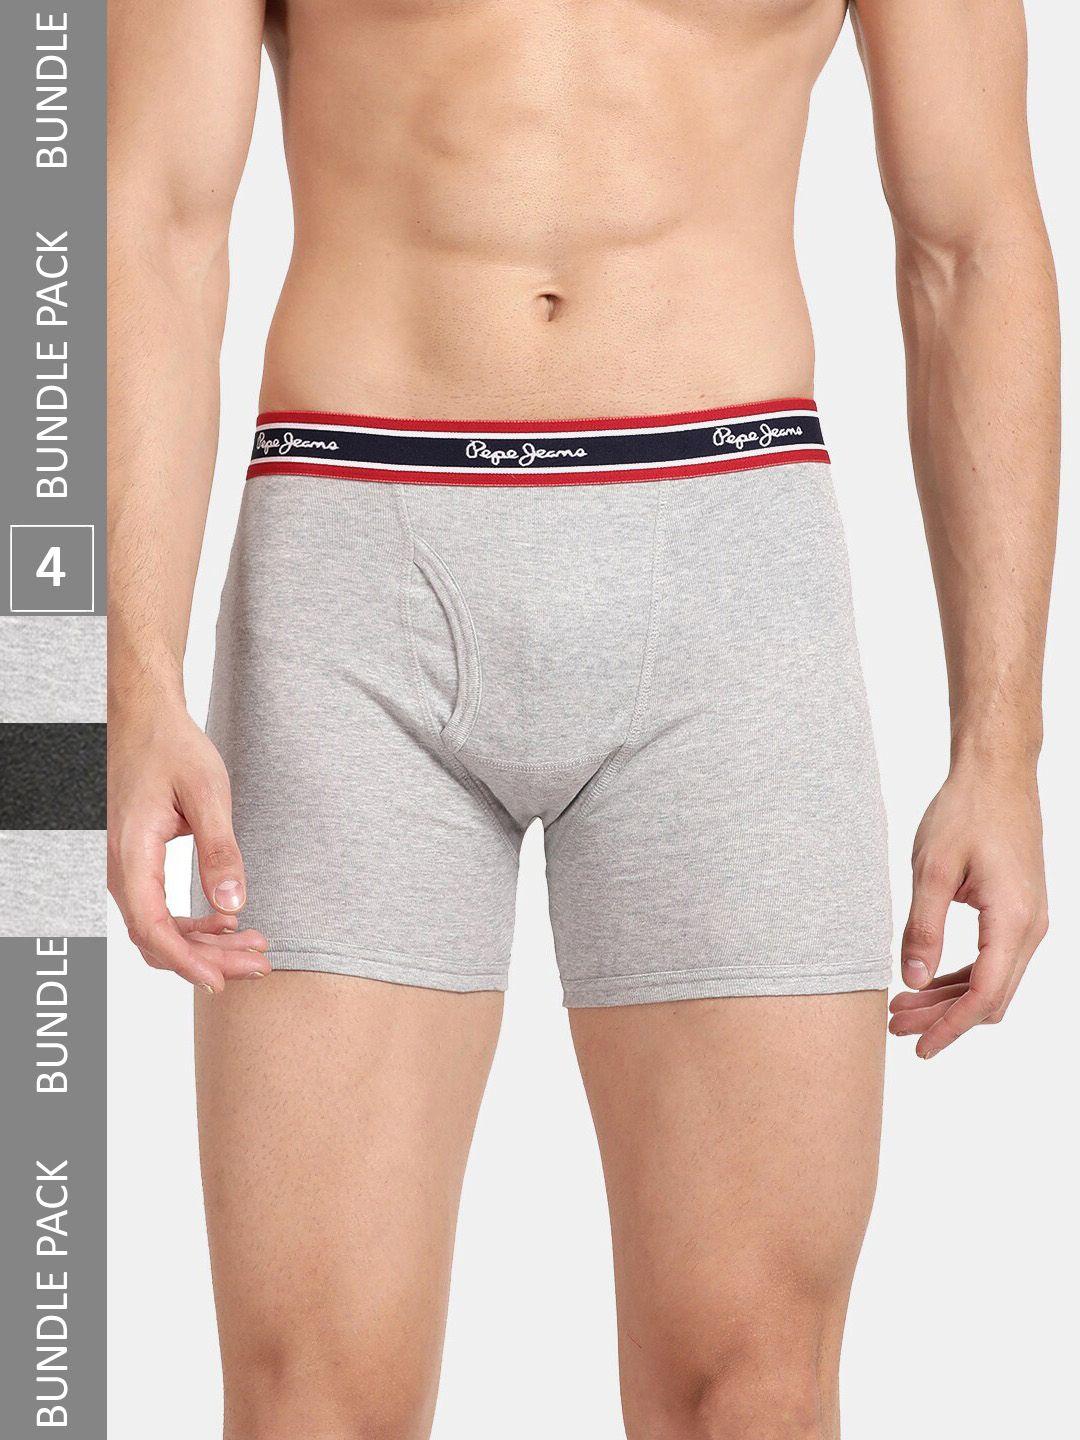 pepe jeans men pack of 4 outer elastic cotton trunks